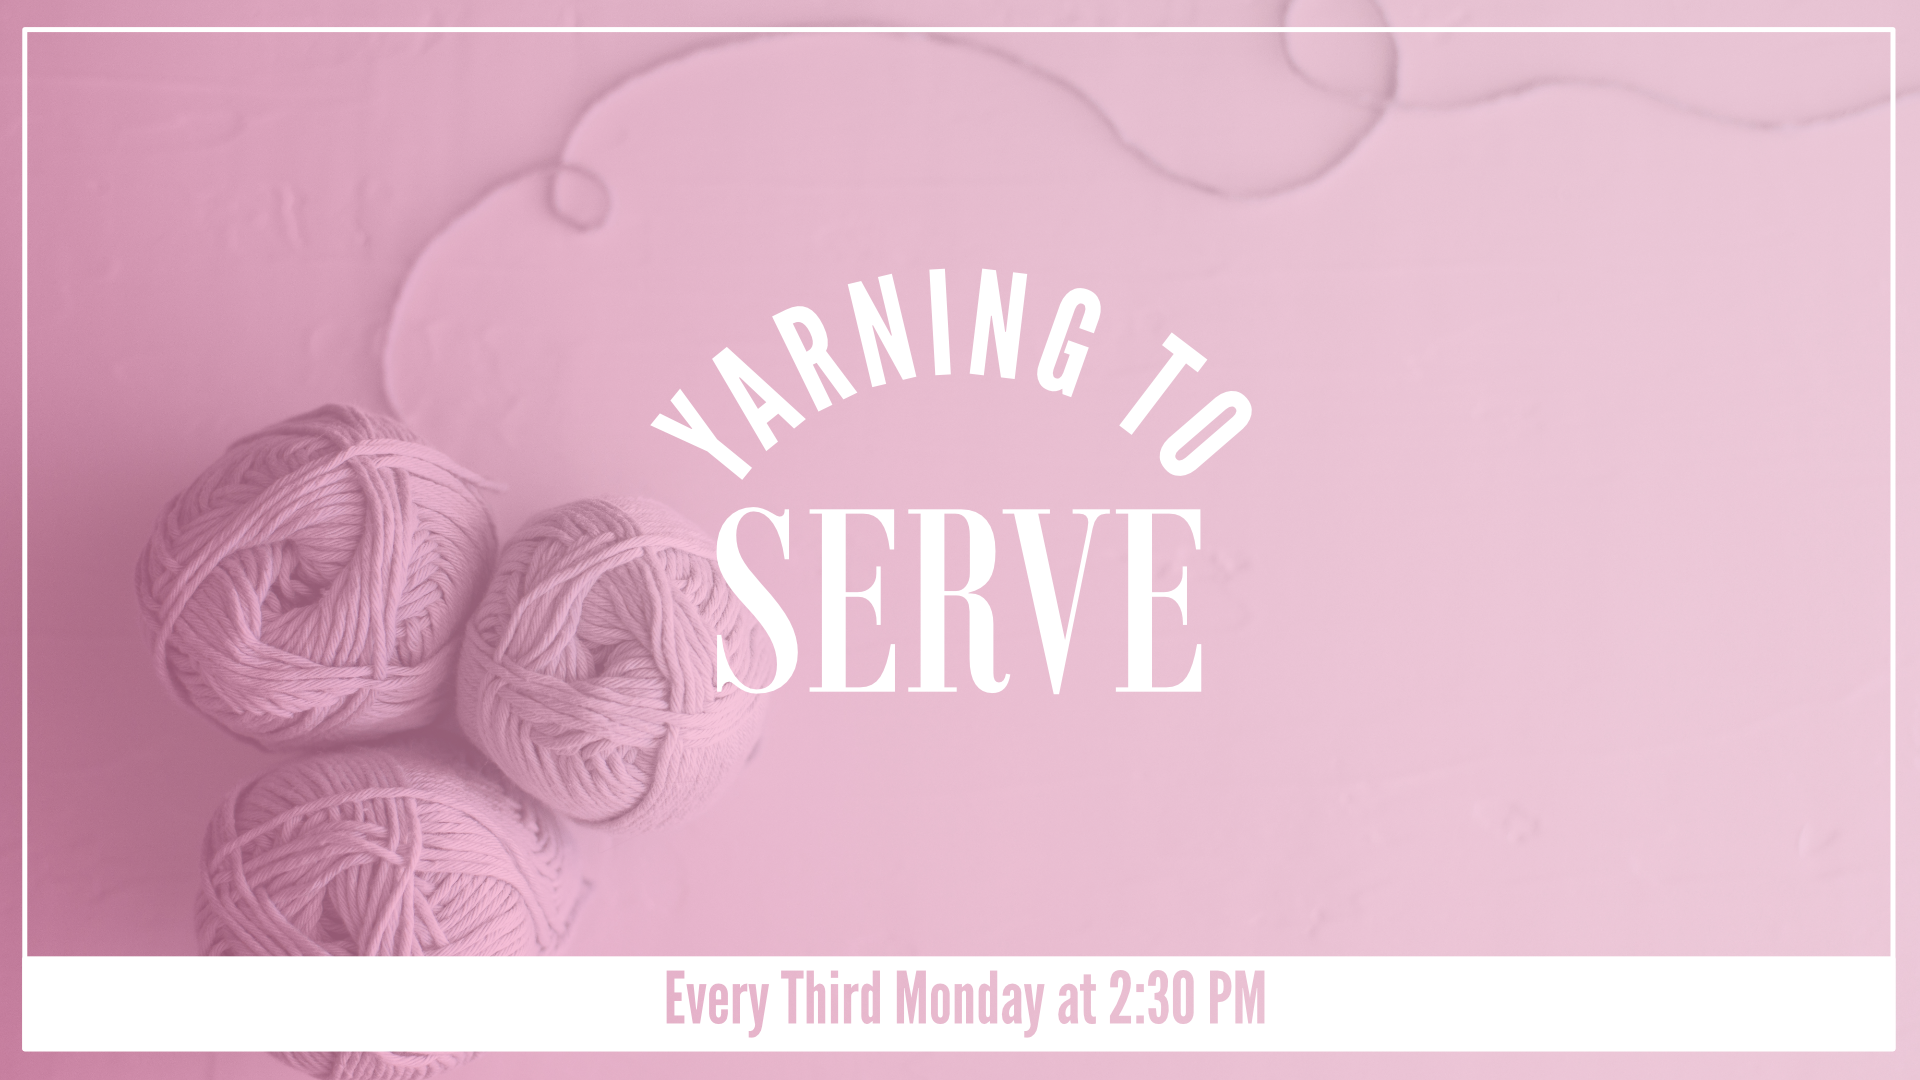 yarning to serve.png